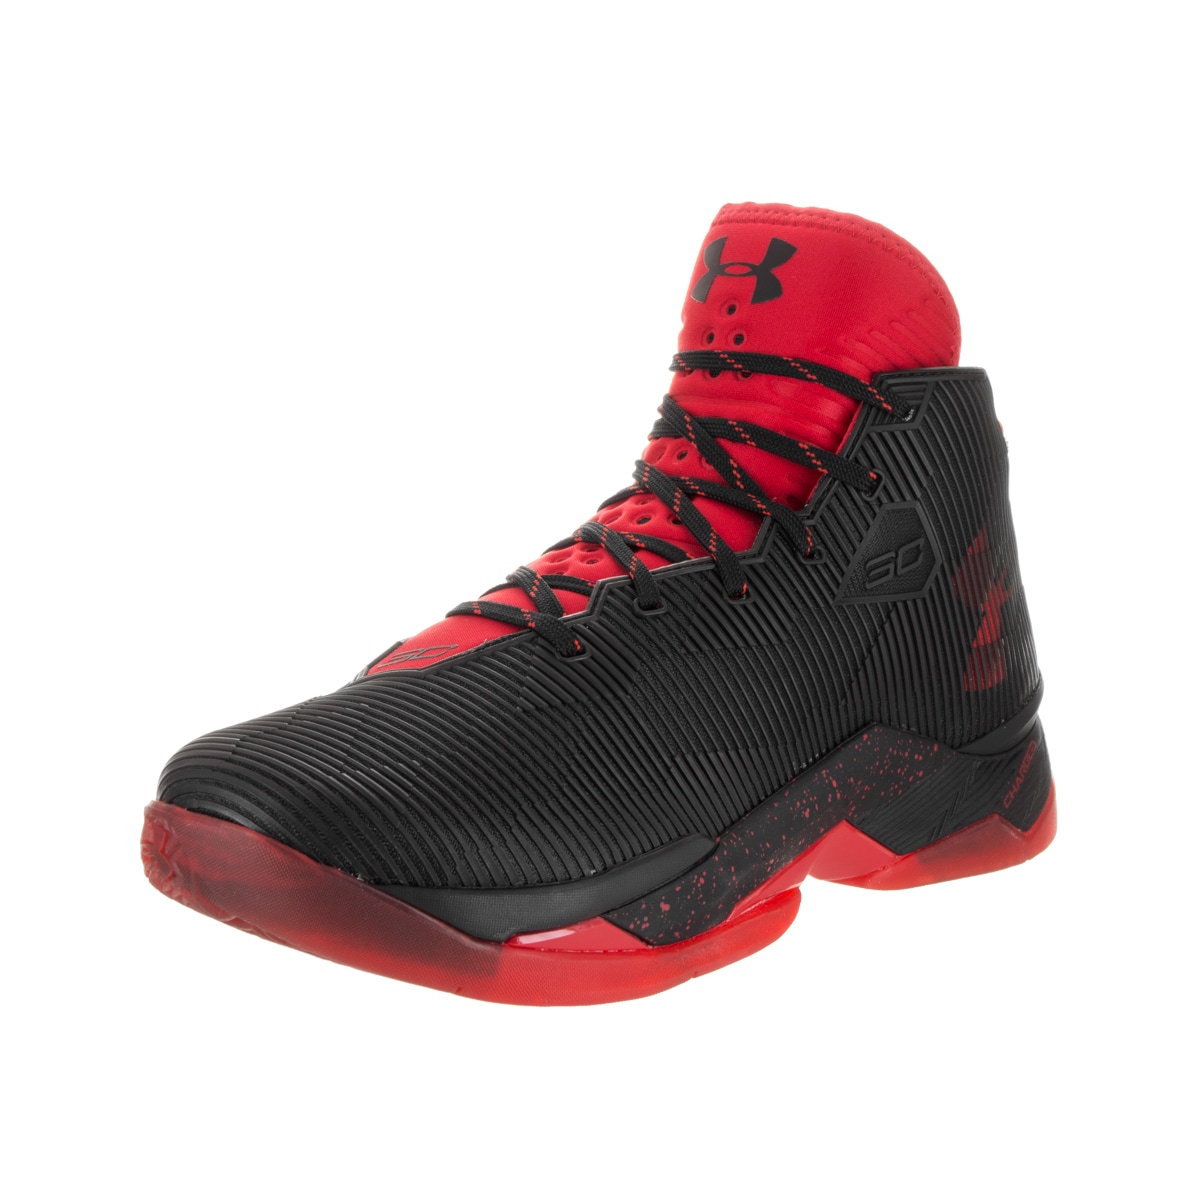 under armour curry 2.5 basketball shoes